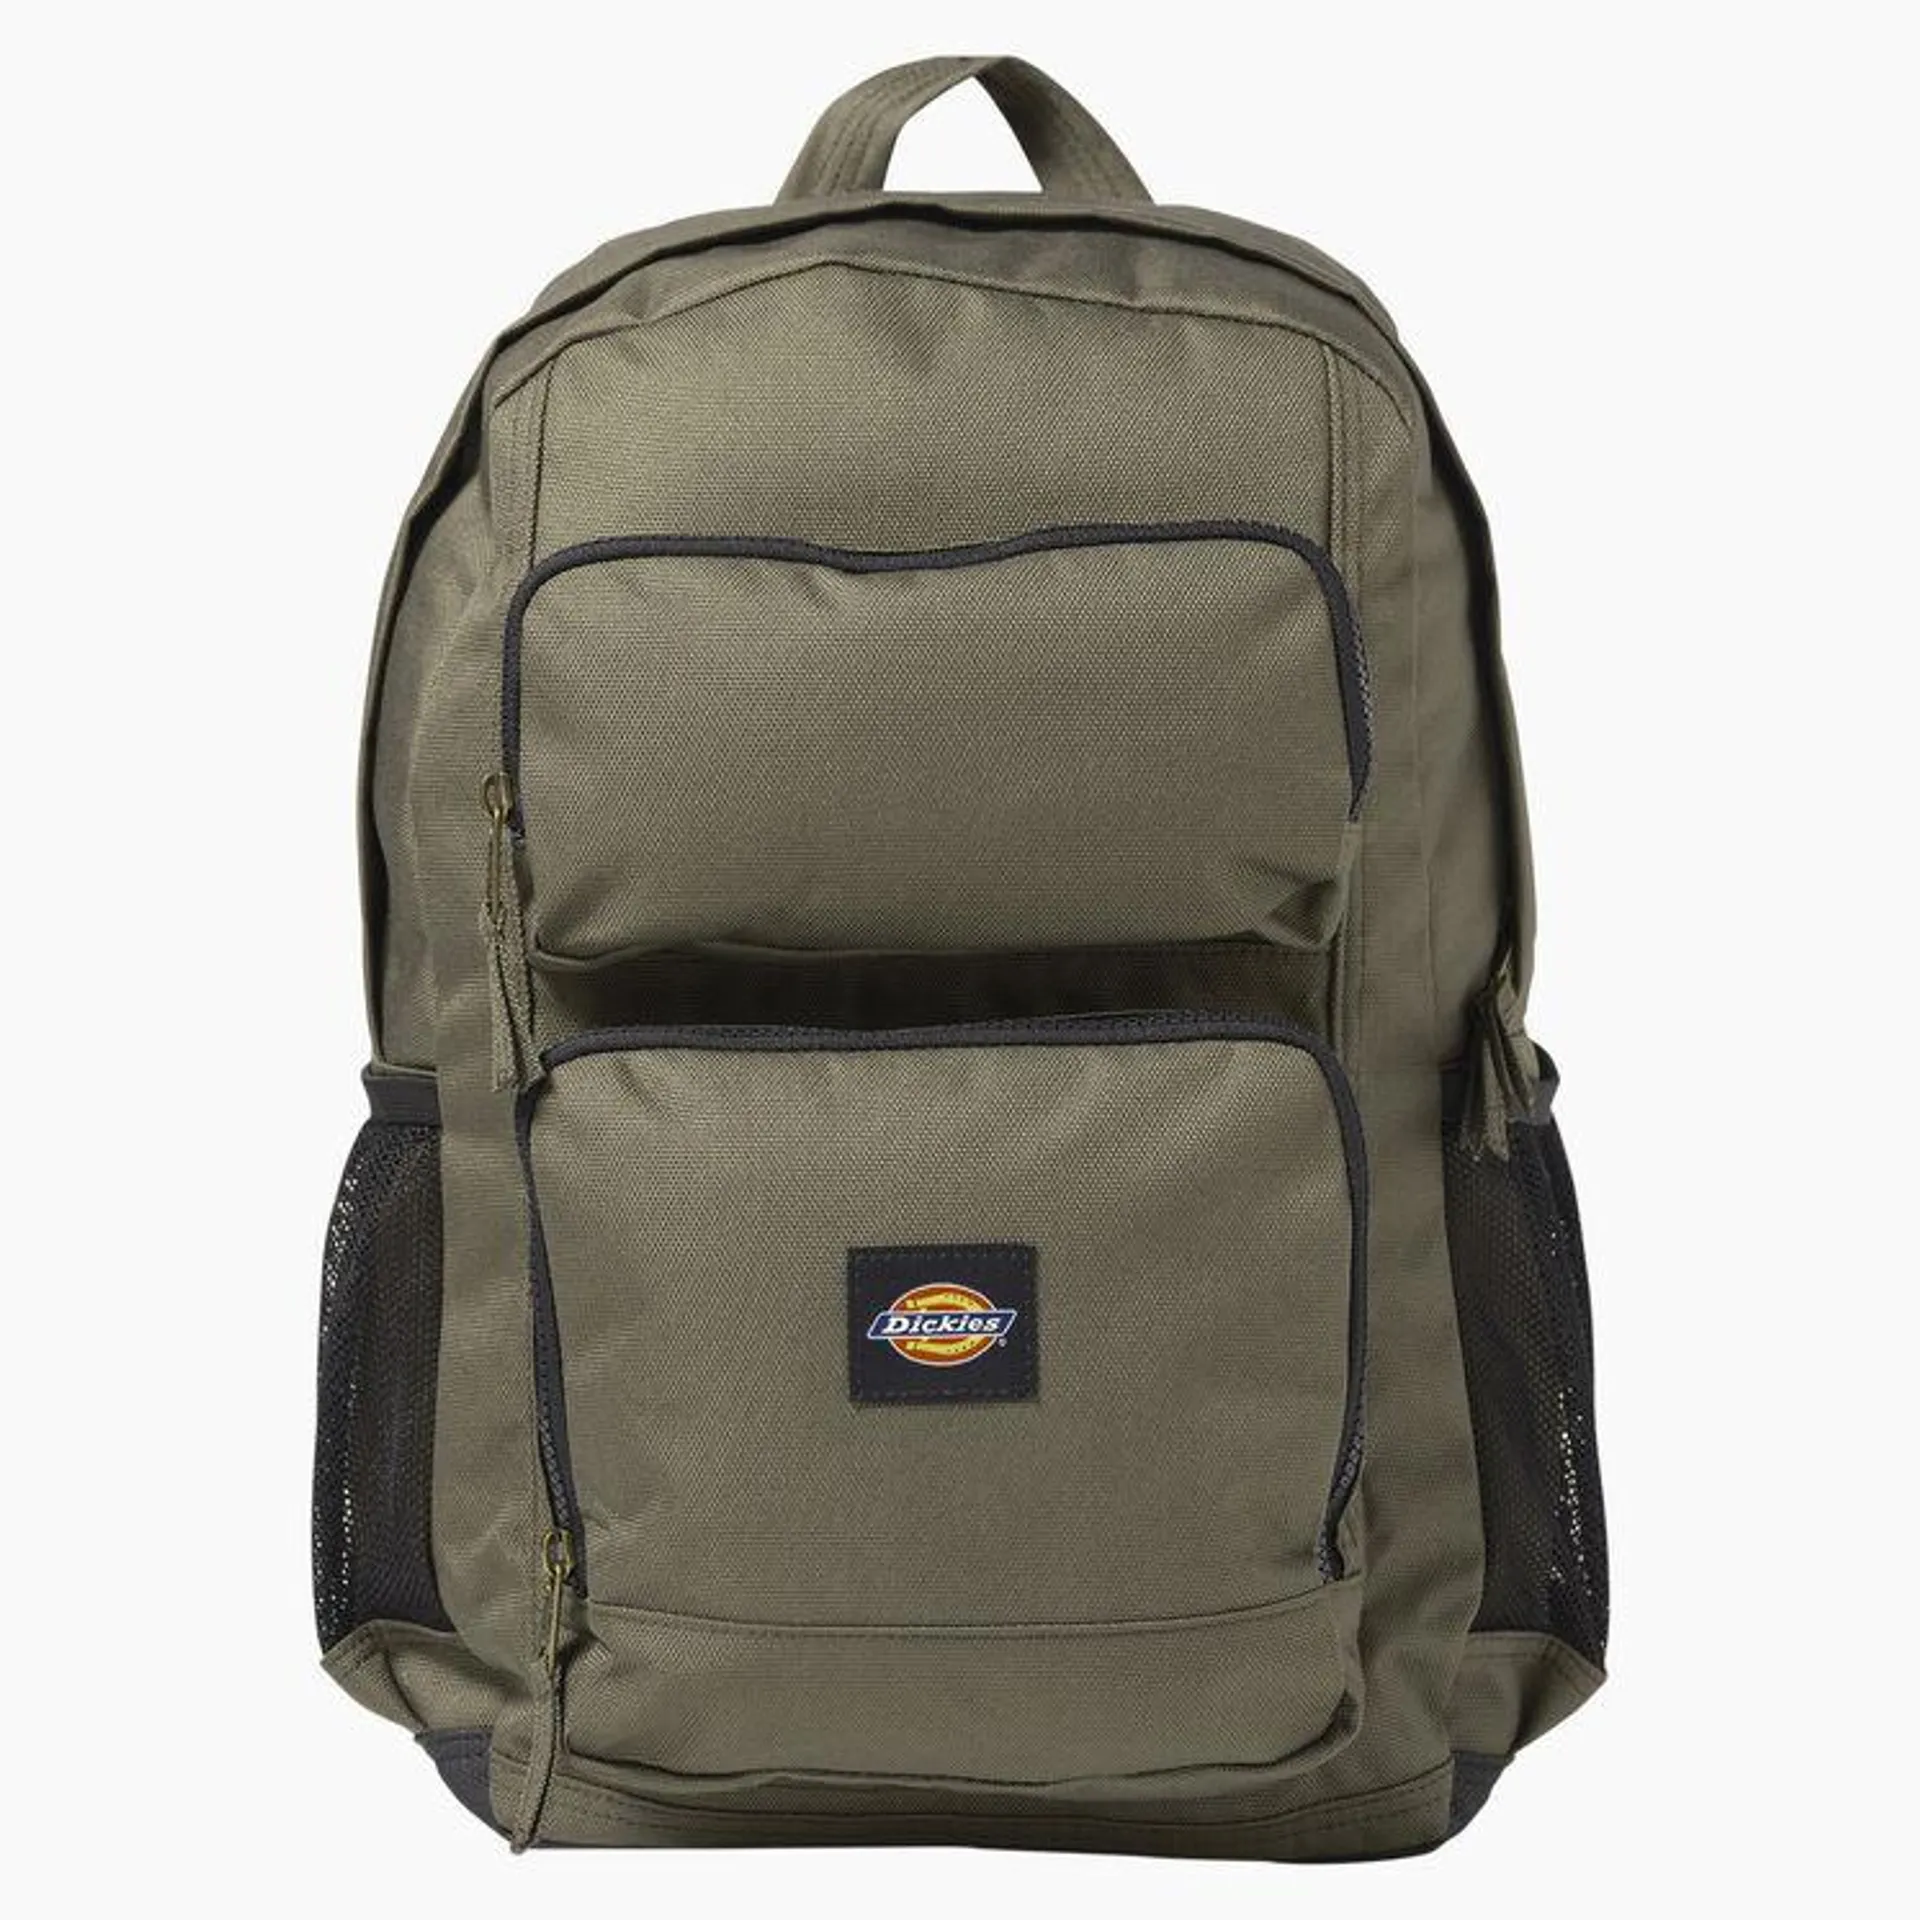 Double Pocket Backpack, Moss Green